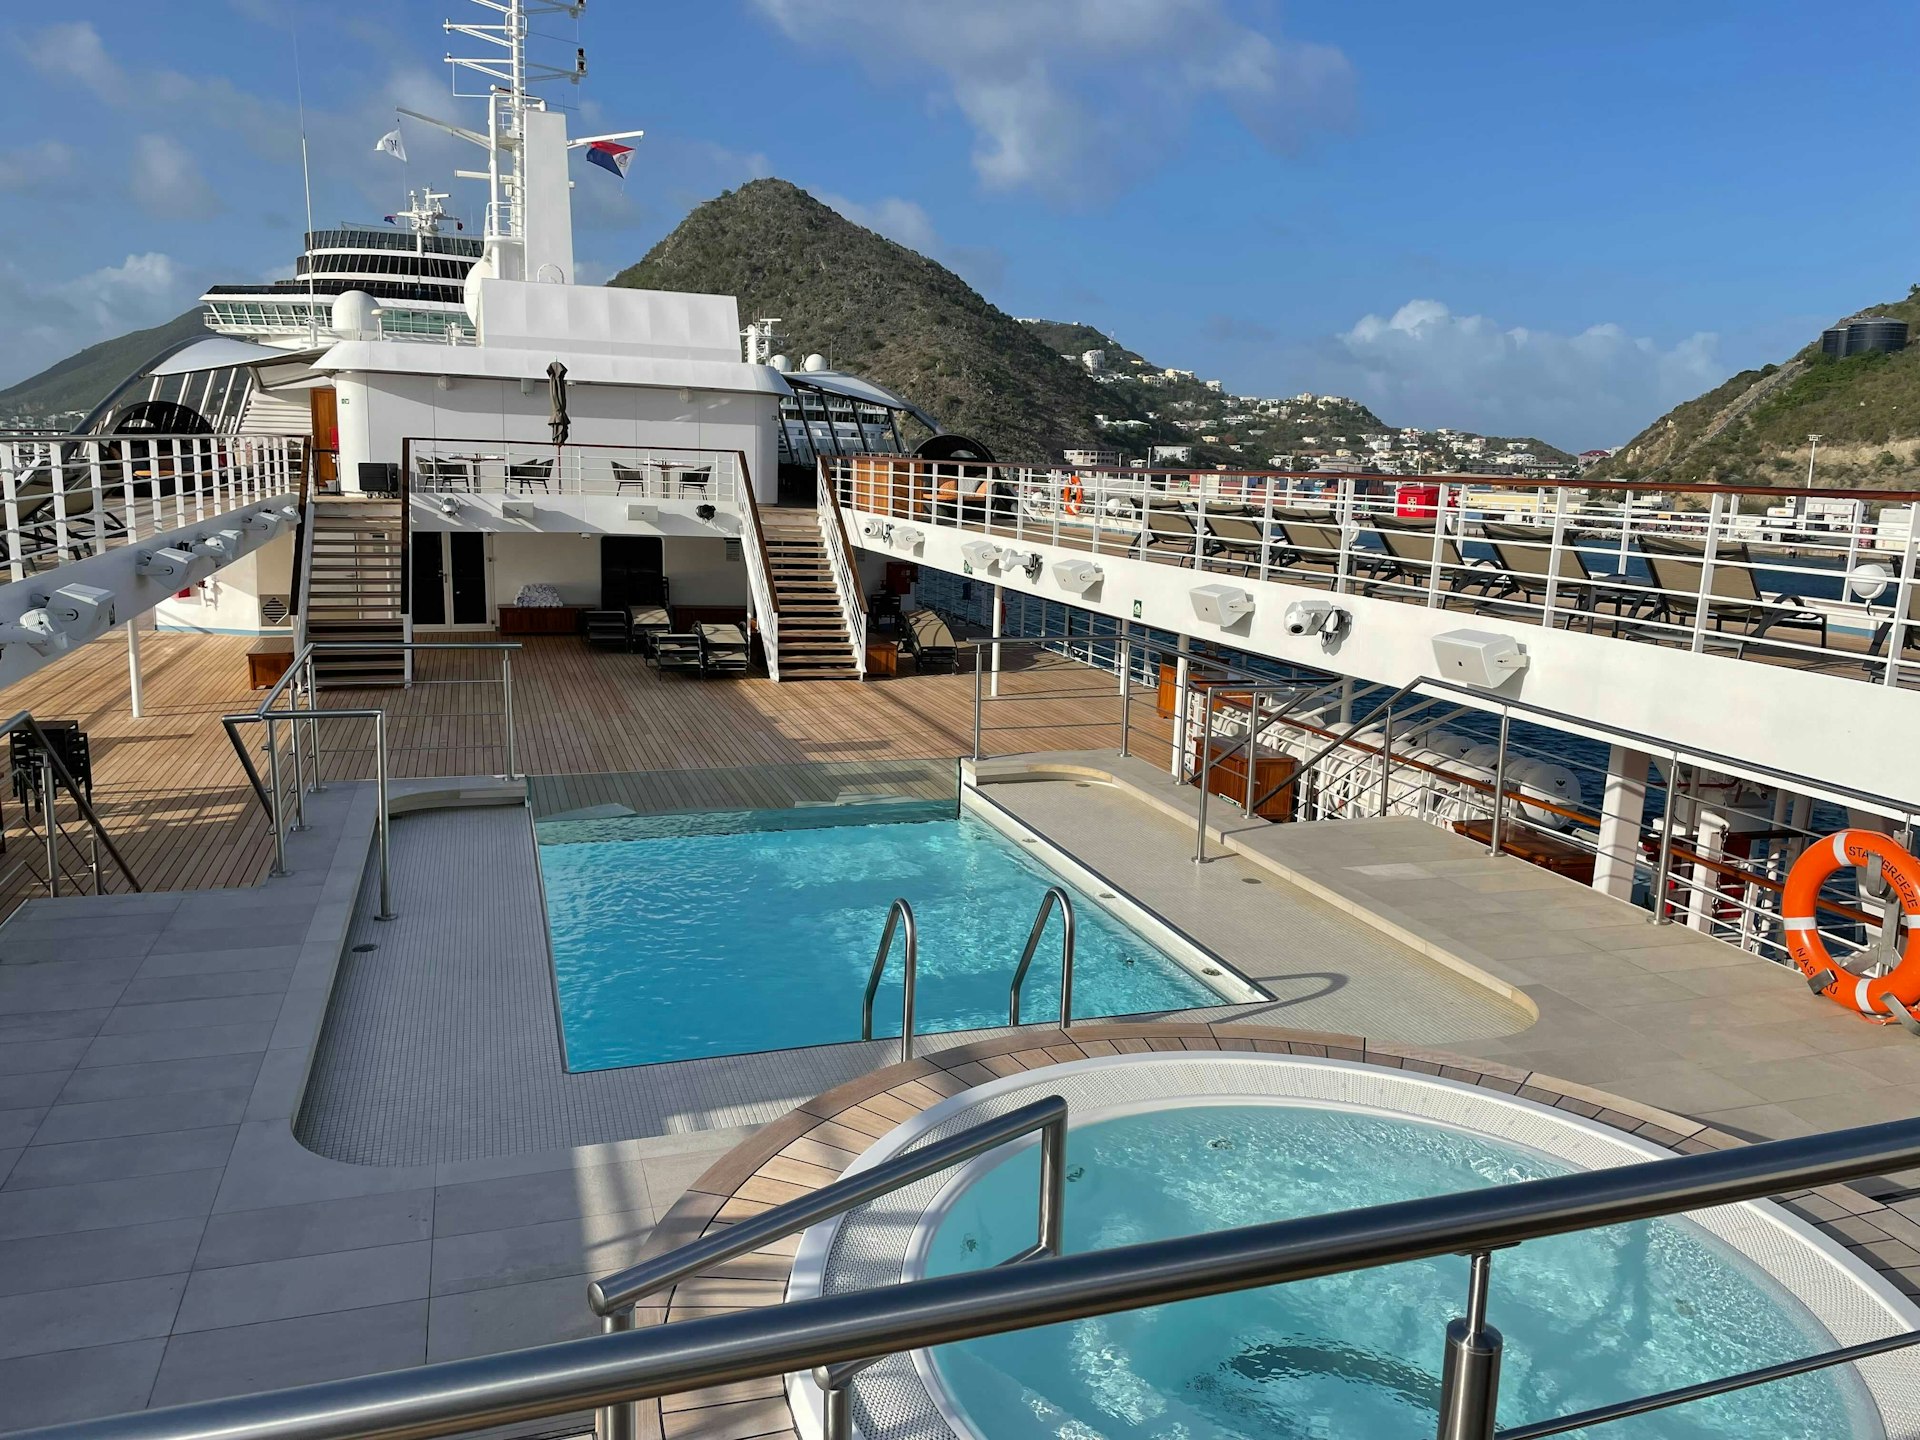 A hot tub and pool on a cruise ship. 